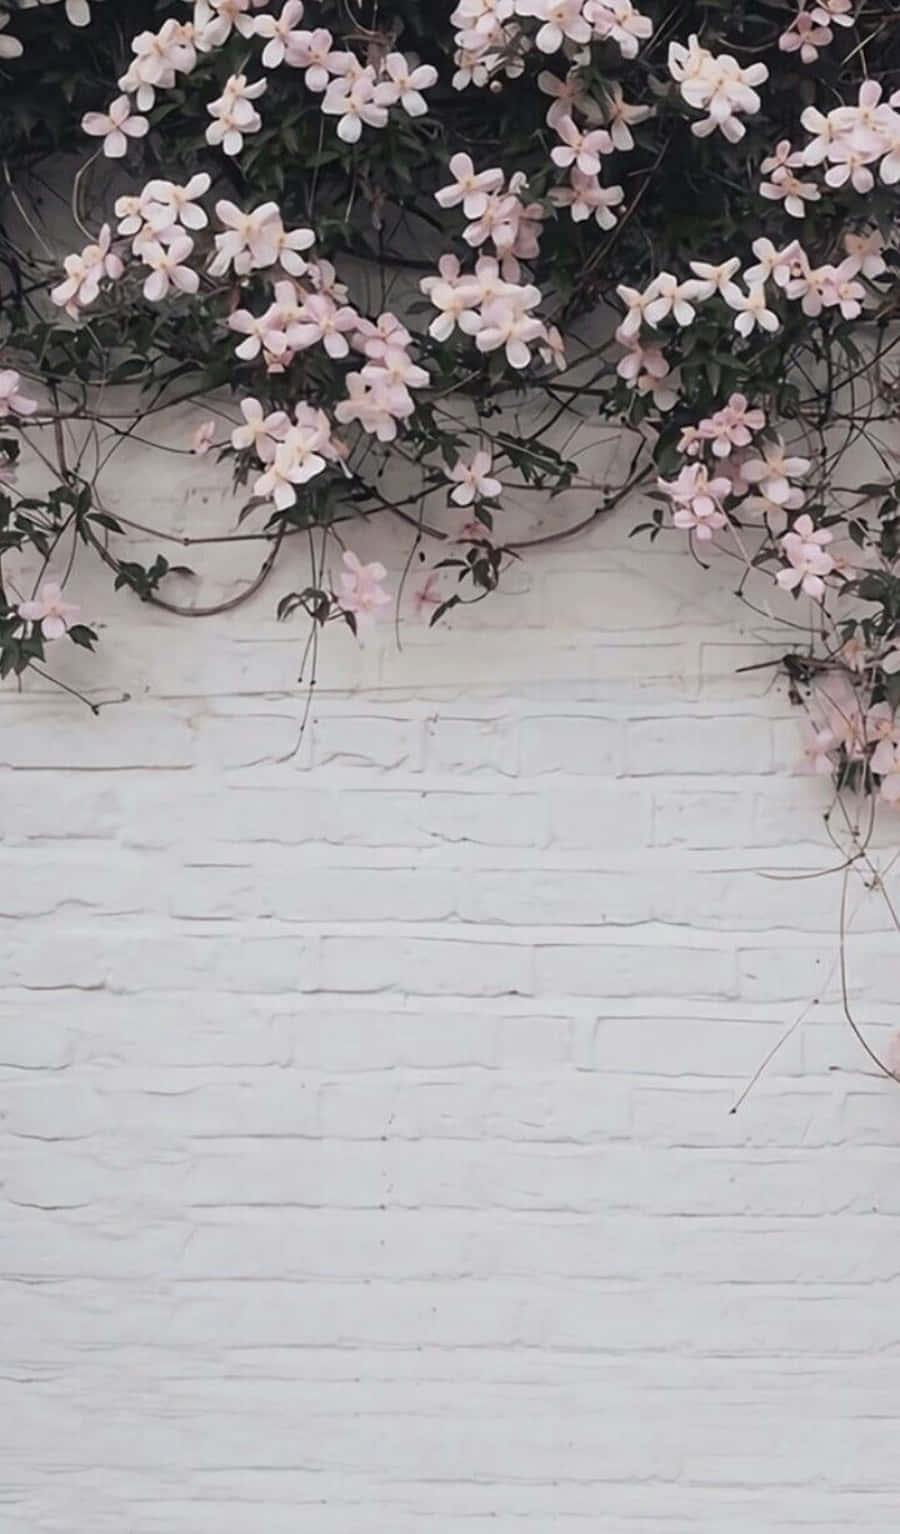 Brighten up your day with a beautiful pink and white aesthetic Wallpaper